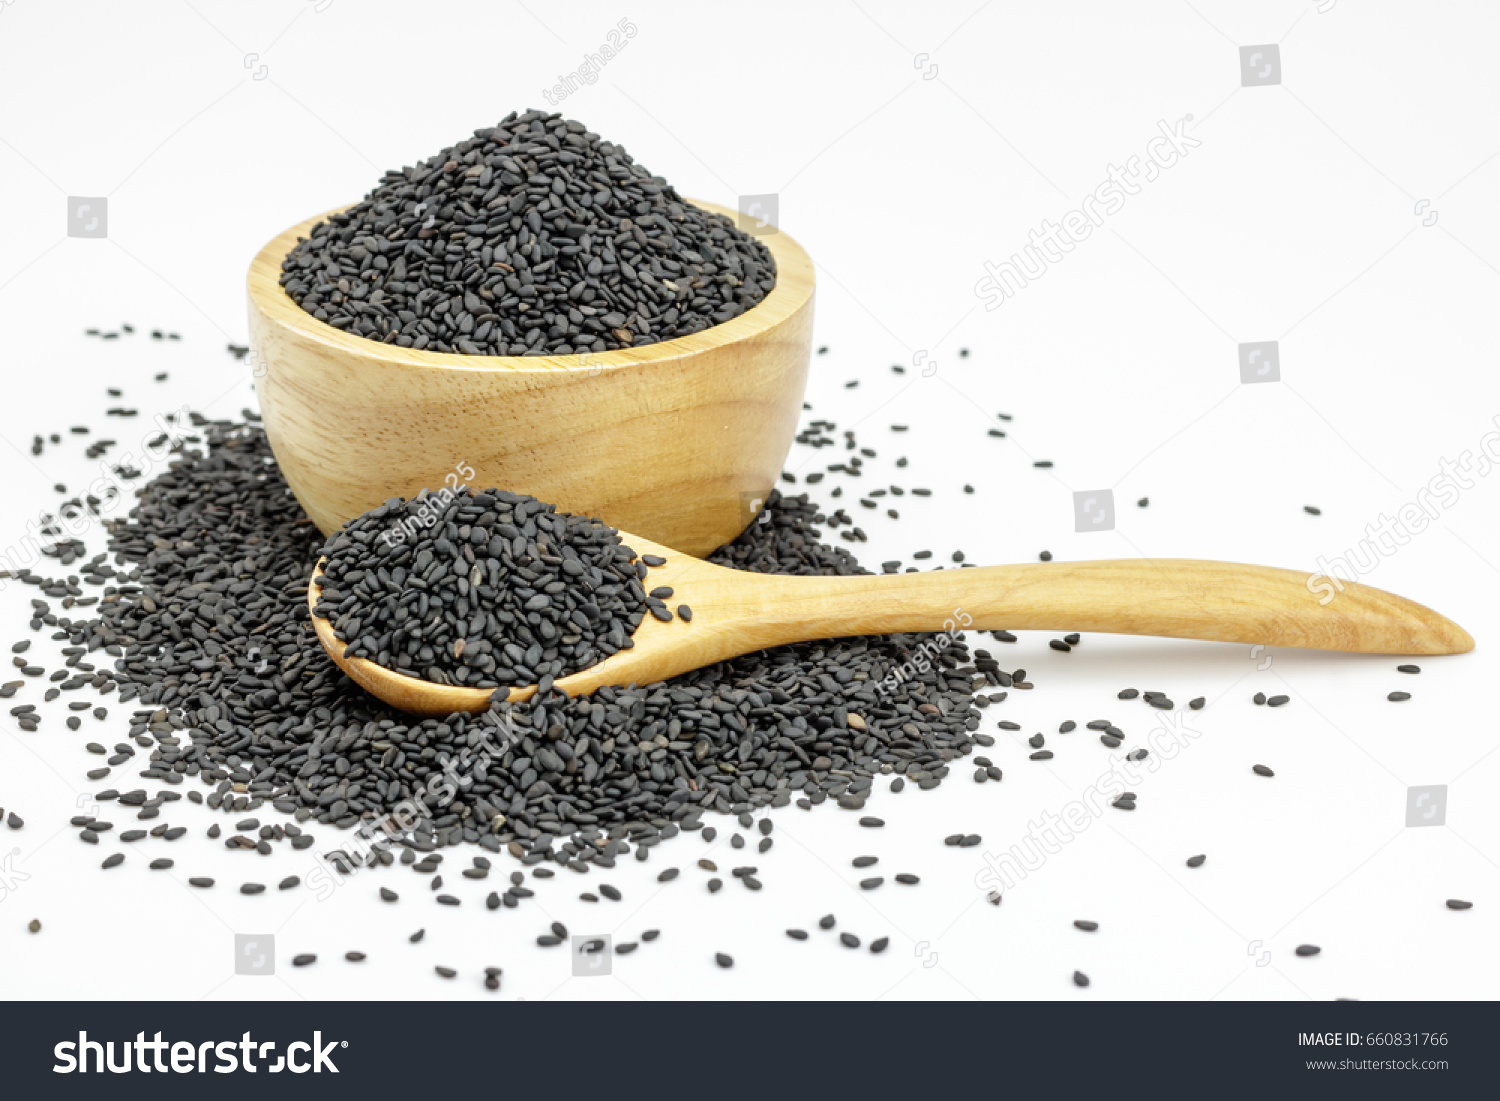 Black Sesame Seeds  in wooden bowl and spoon on white background. Composition isolated over the white background. #660831766